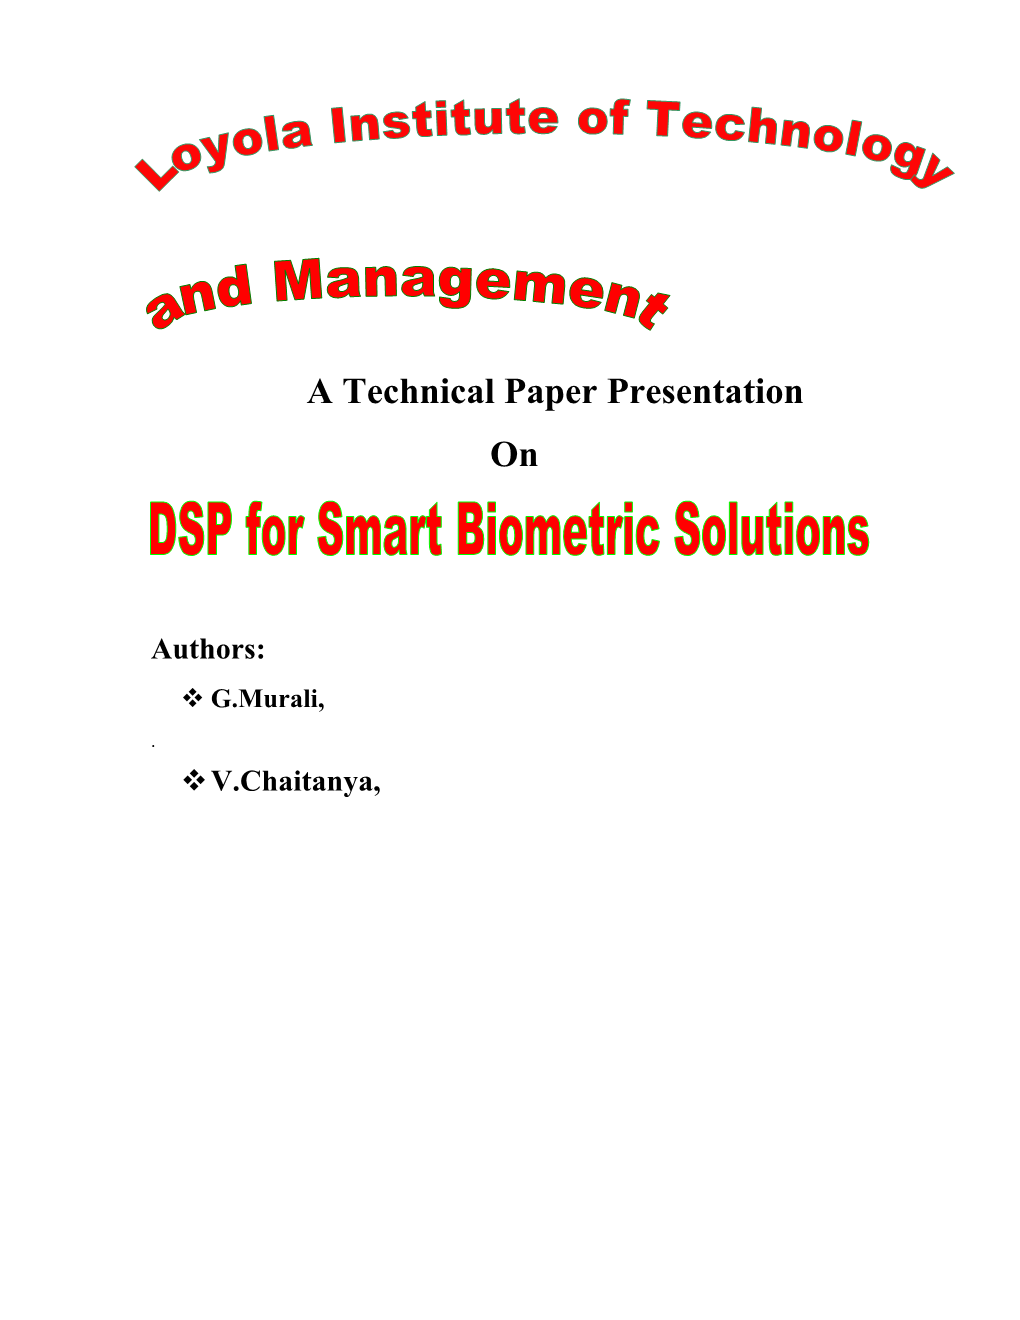 DSP for Smart Biometric Solutions